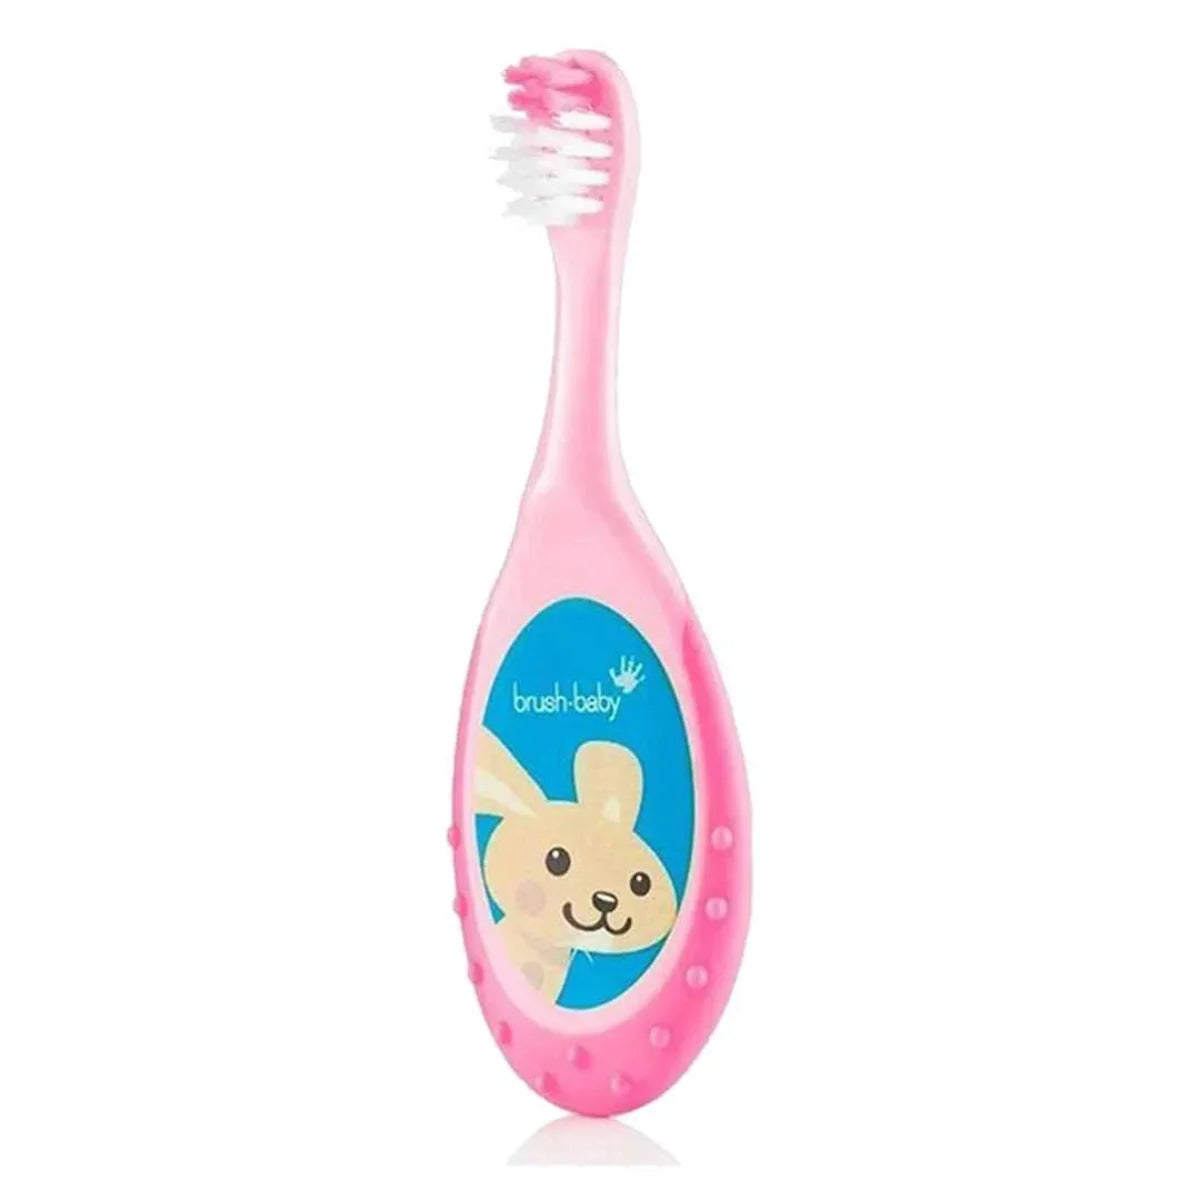 single pink flossbrush baby first toothbrush with blue label for 0-3 years